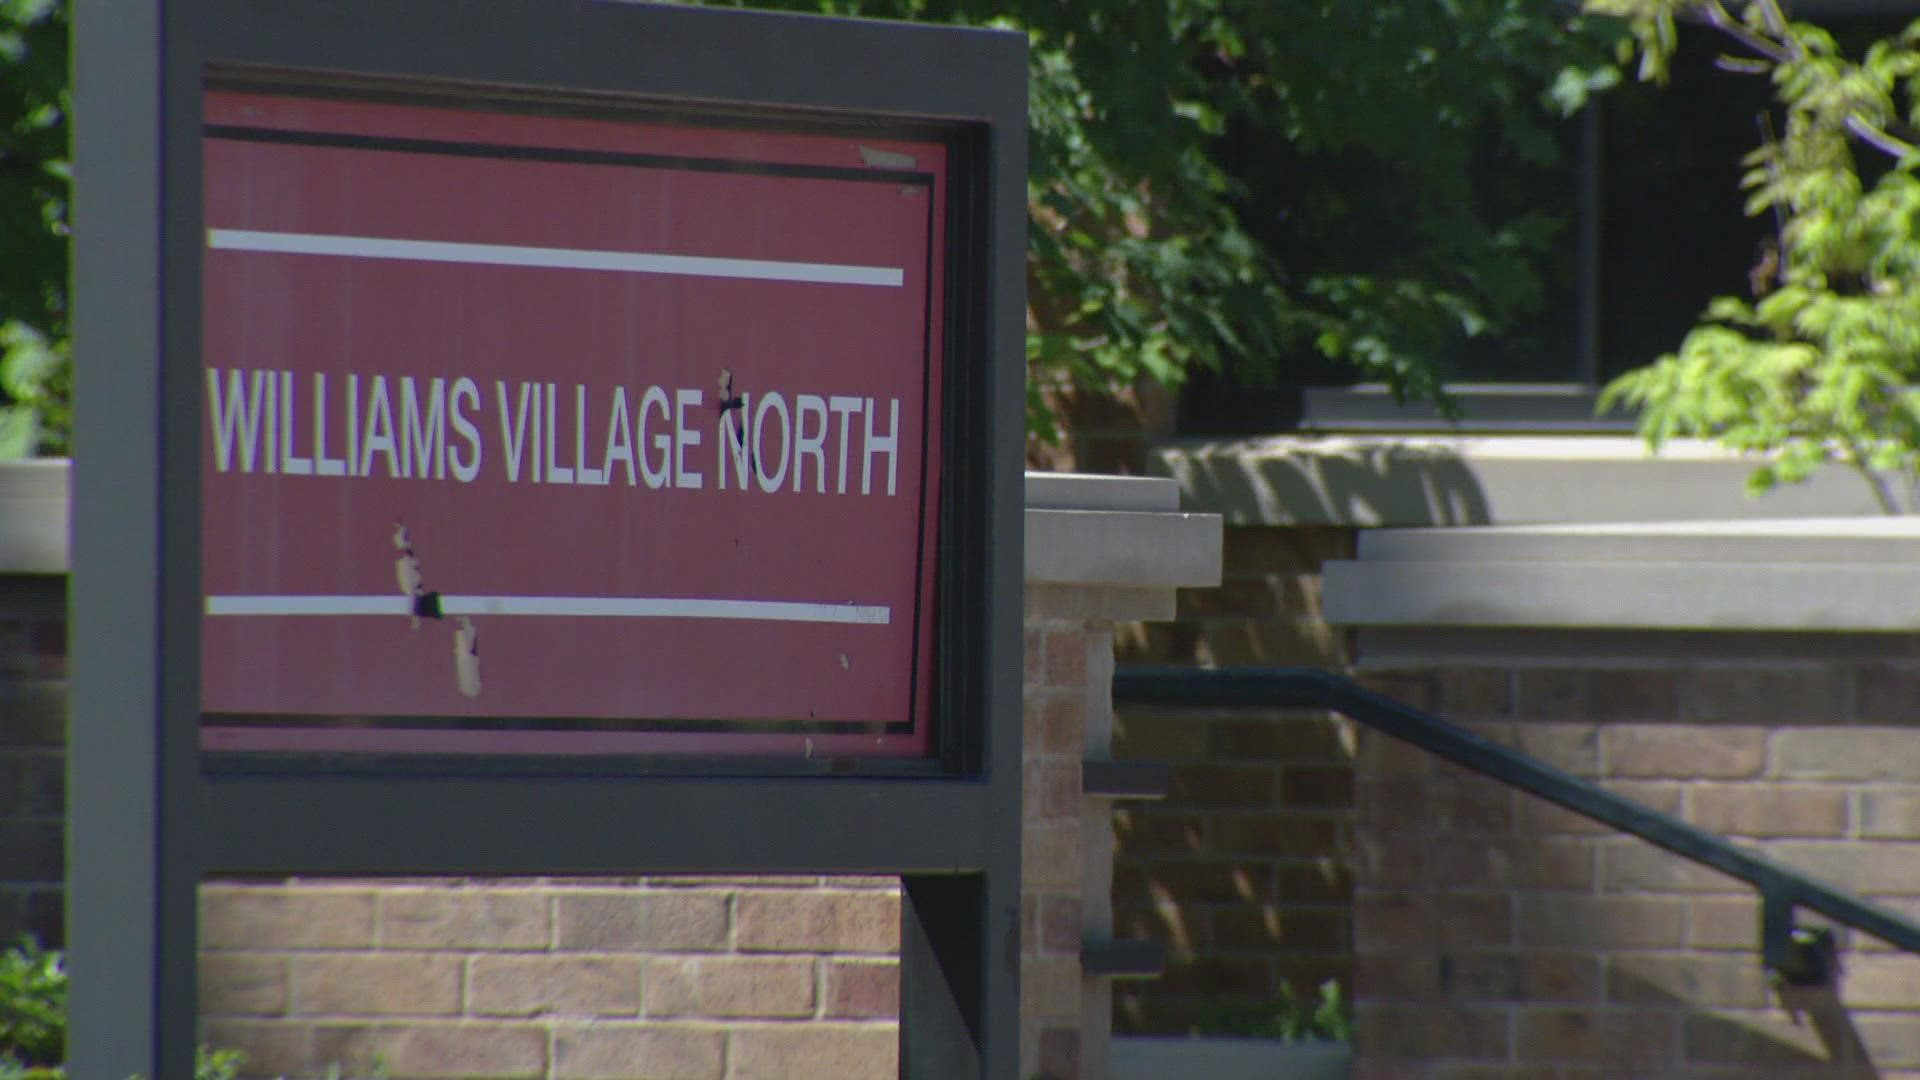 Police are looking for a college-aged man who's about 6-feet tall with dirty blonde hair after the reported assault at Williams Village North.